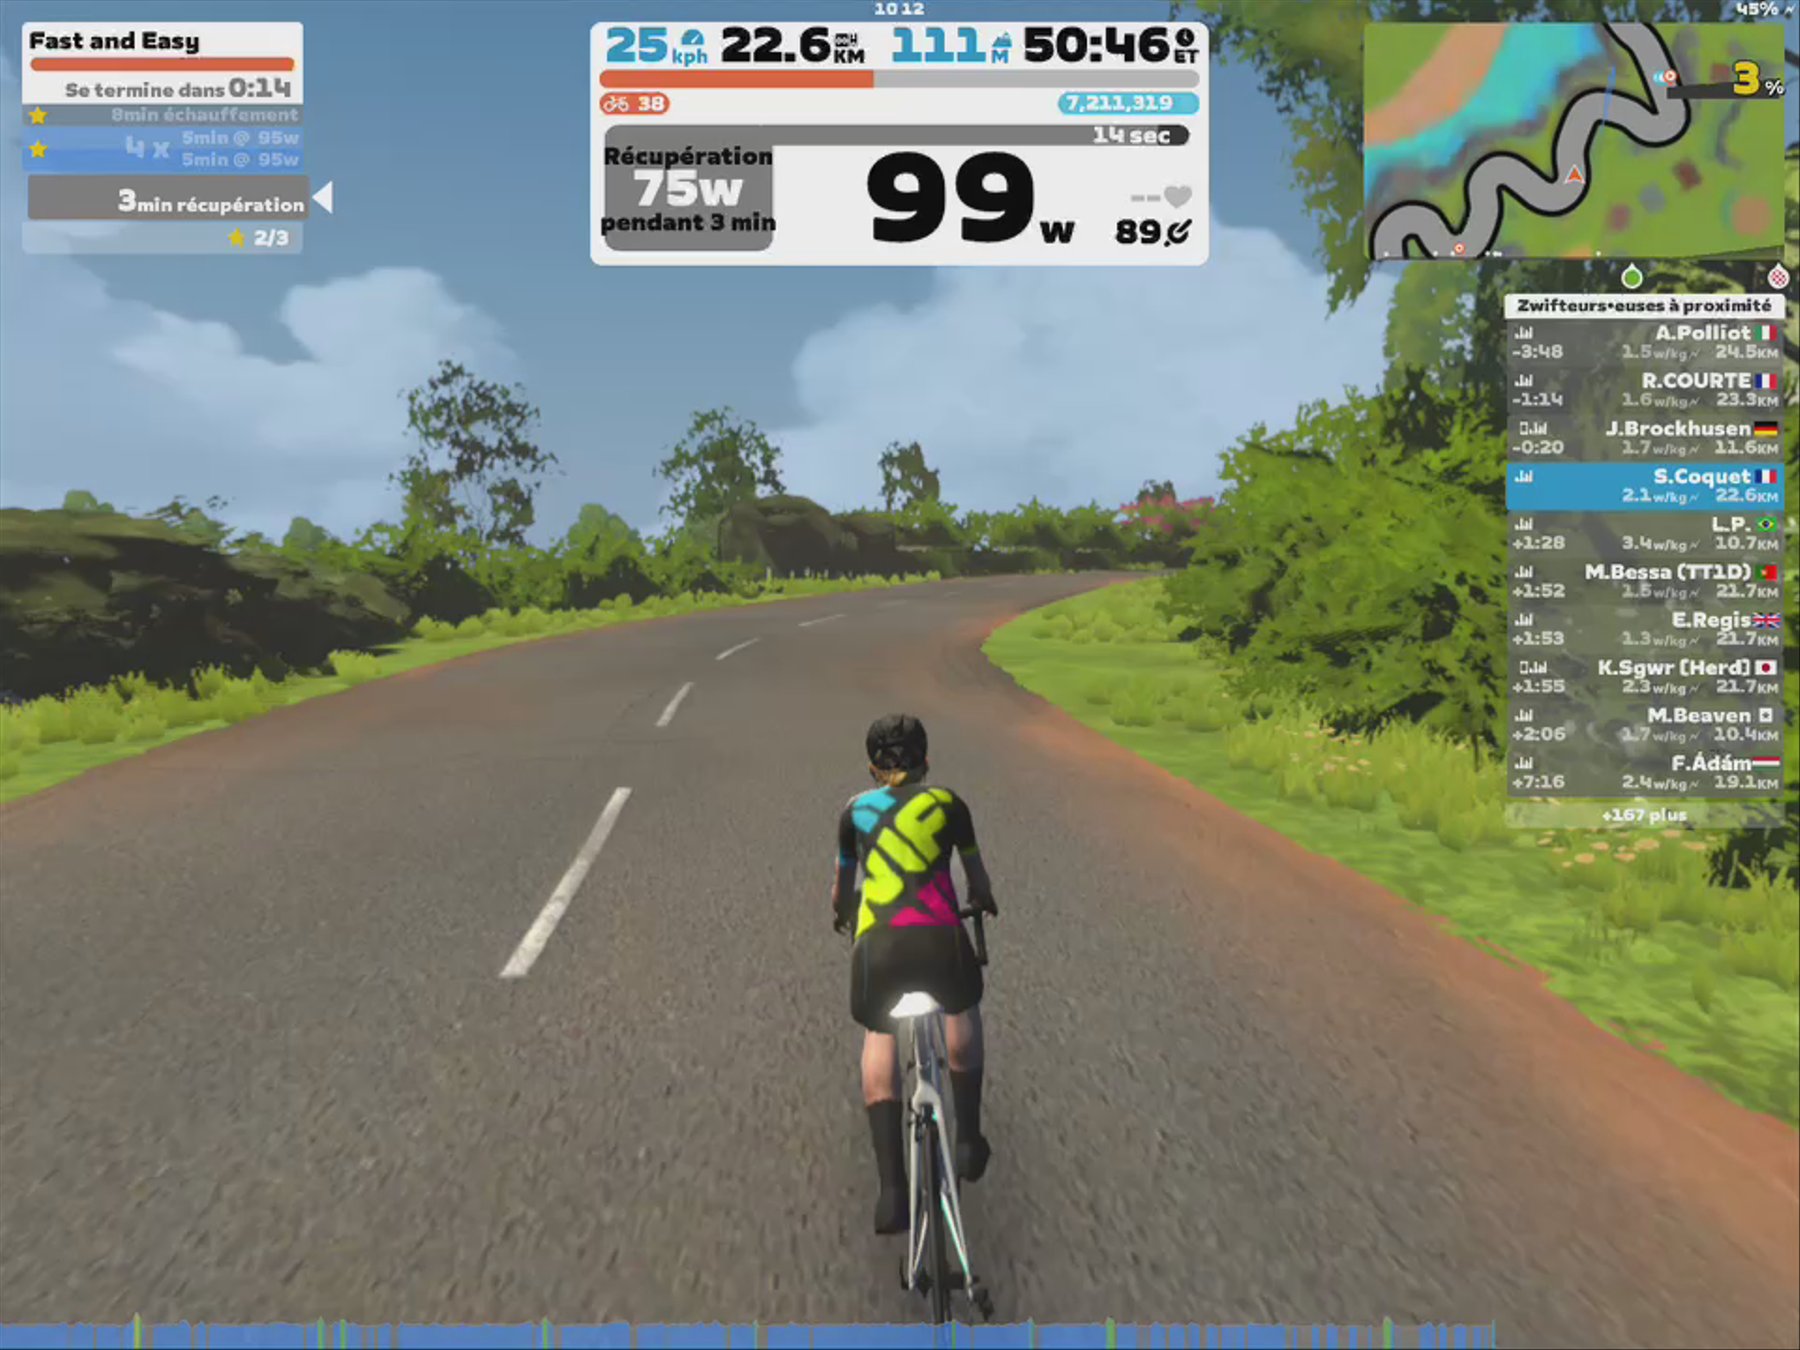 Zwift - Fast and Easy in France